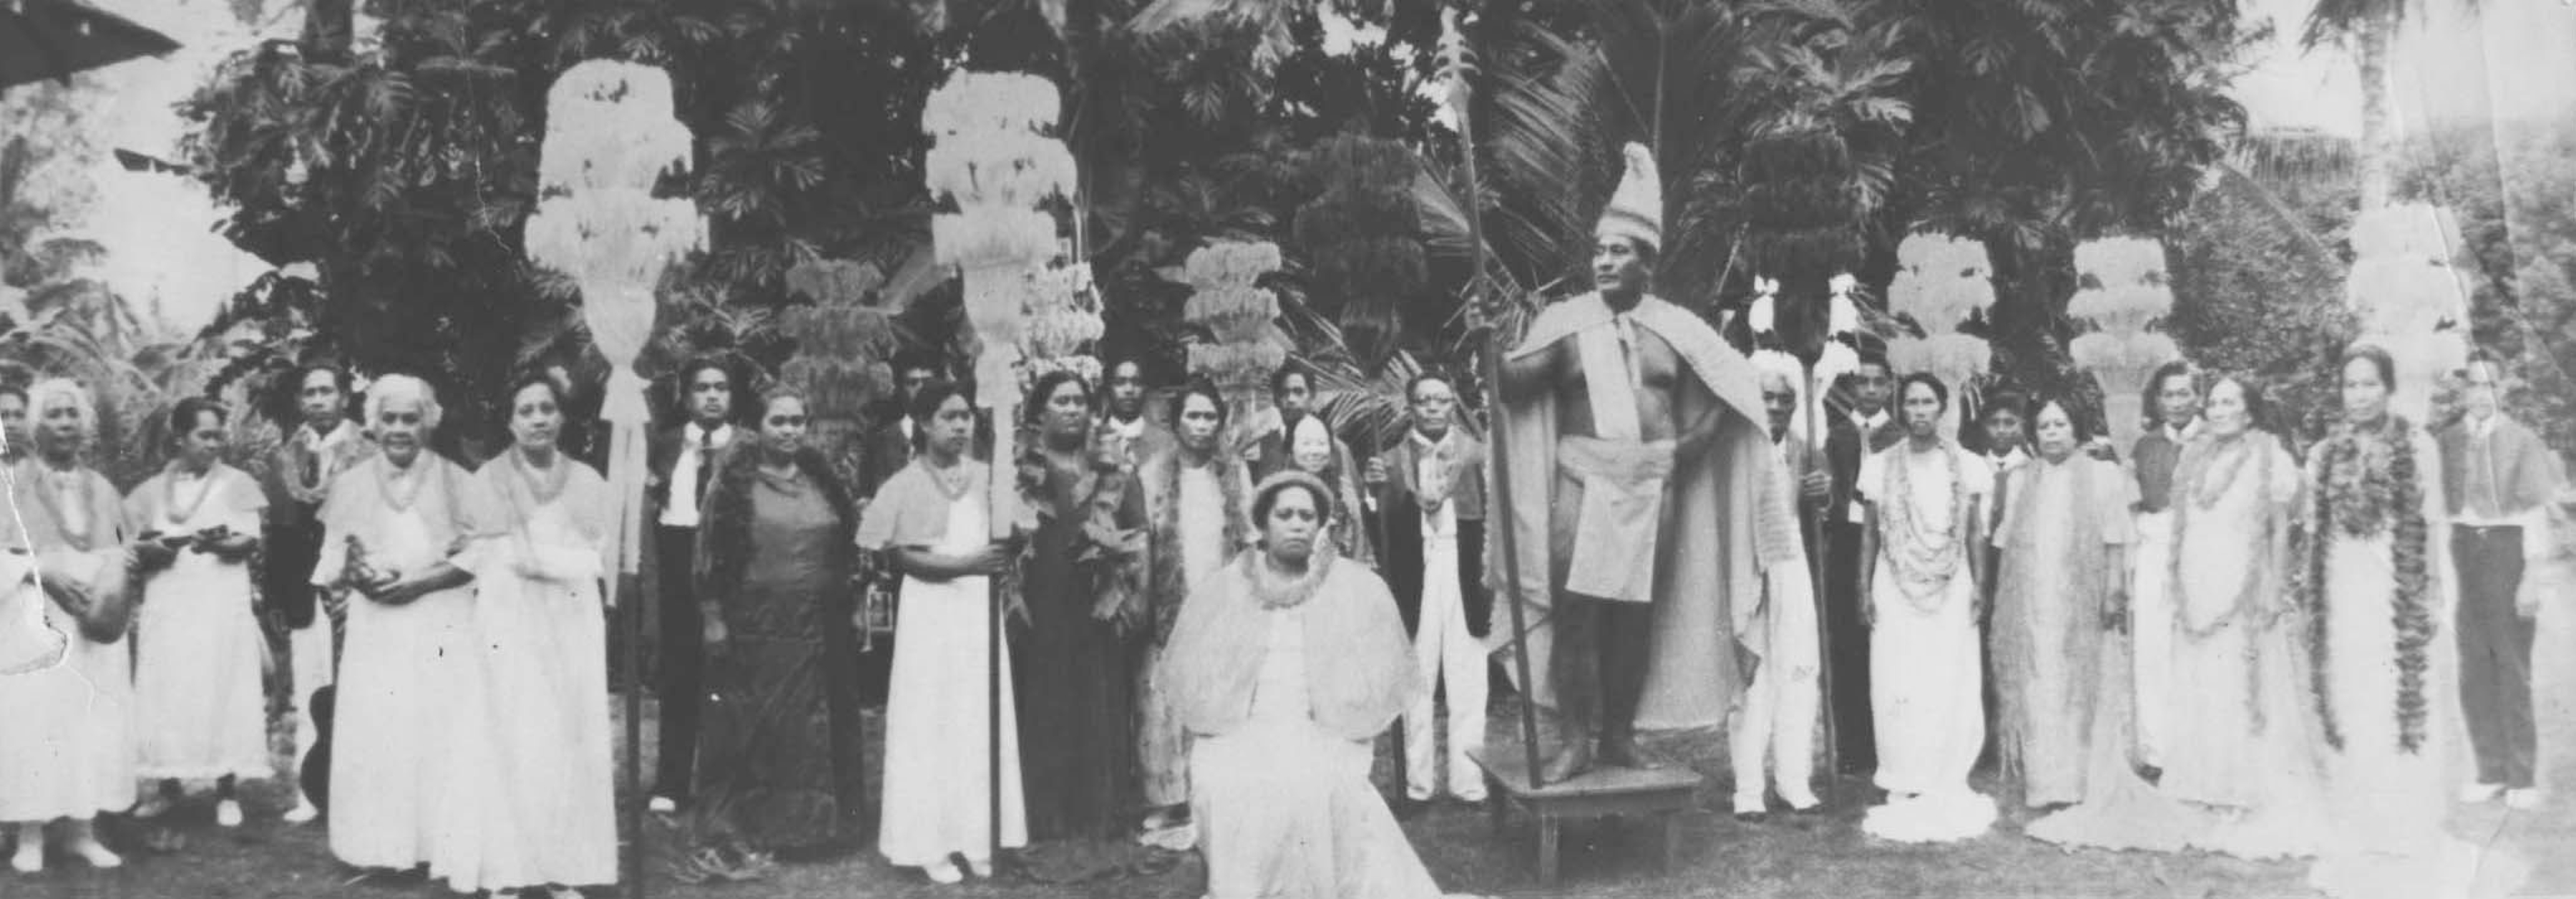 photograph of Hamana Kalili and locals from Laie portraying the royal court of King Kamehameha, with Kalili serving as the king.